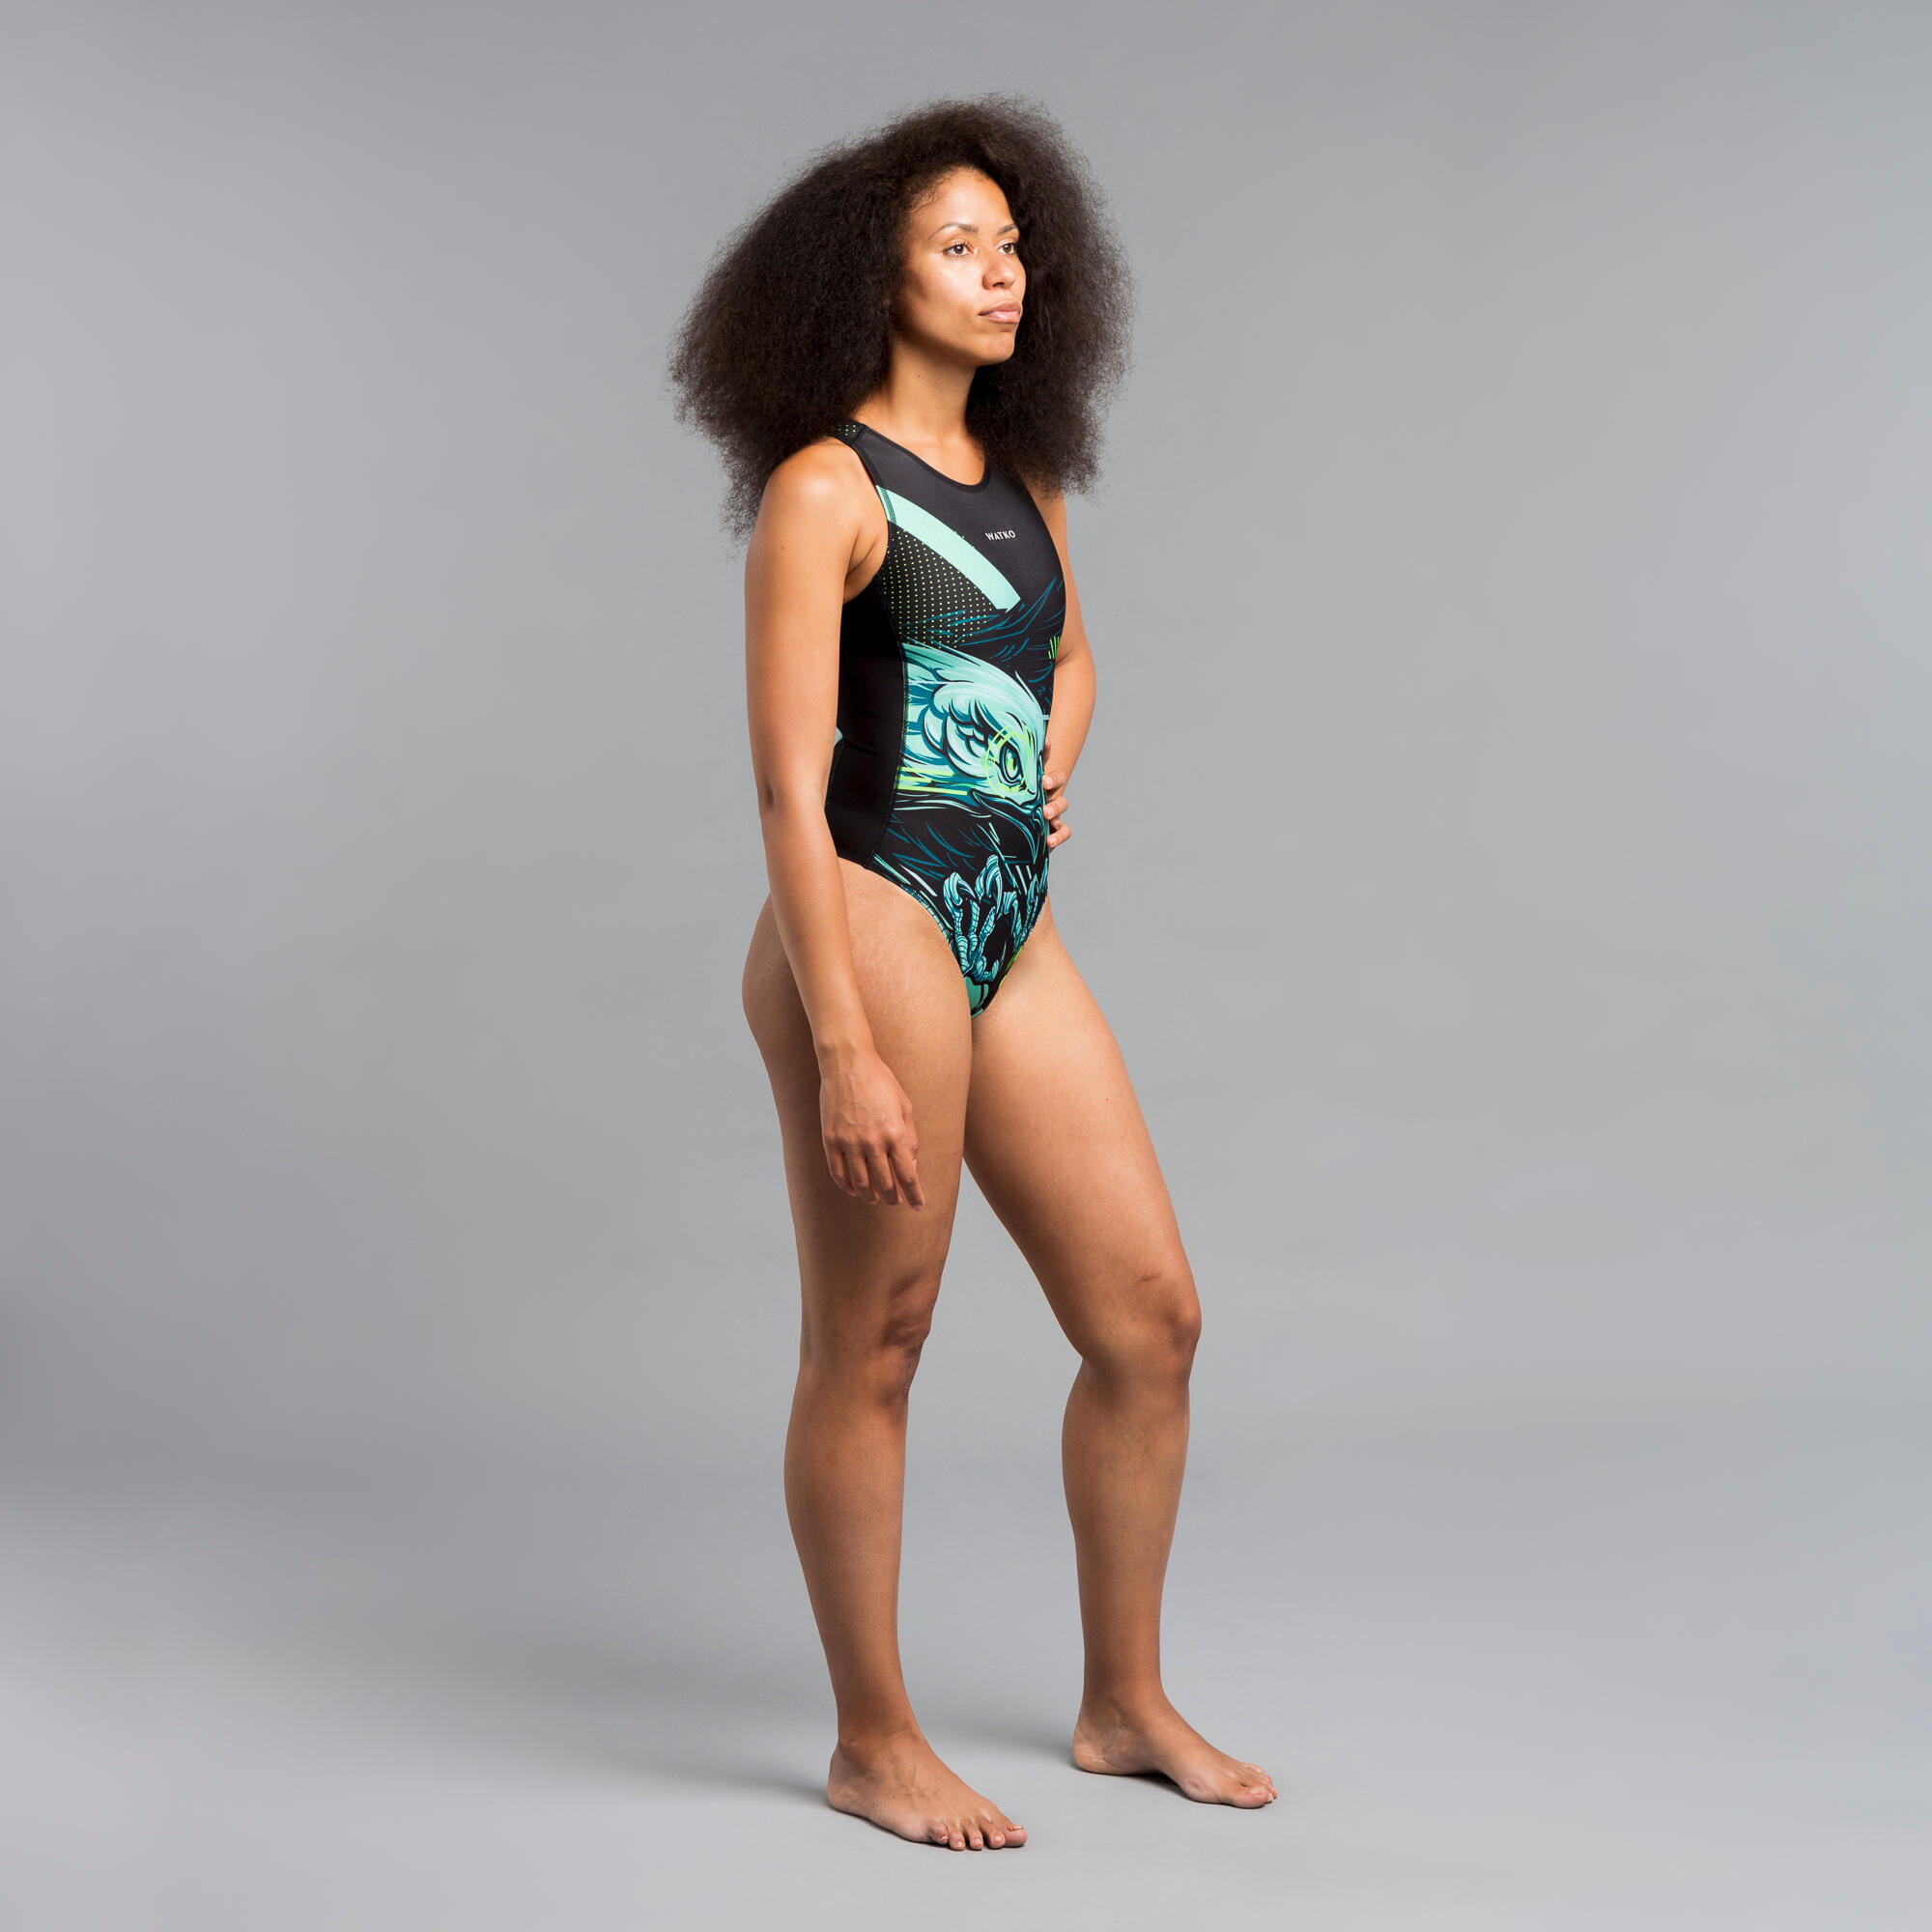 WOMEN'S ONE-PIECE WATER POLO SWIMSUIT - EAGLE GREEN 2/5